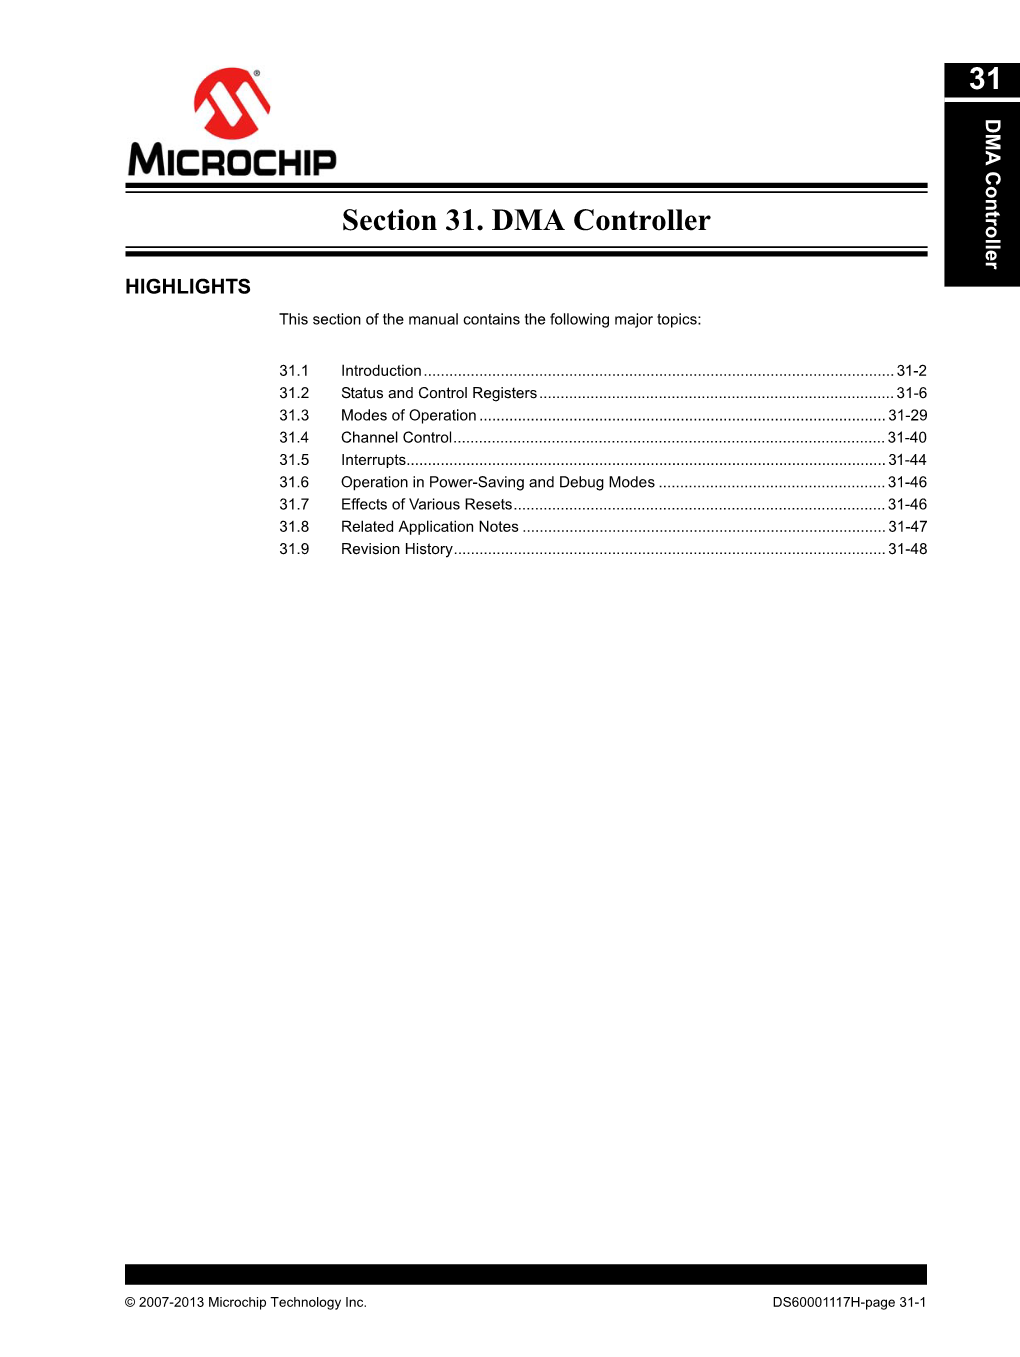 Section 31. DMA Controller